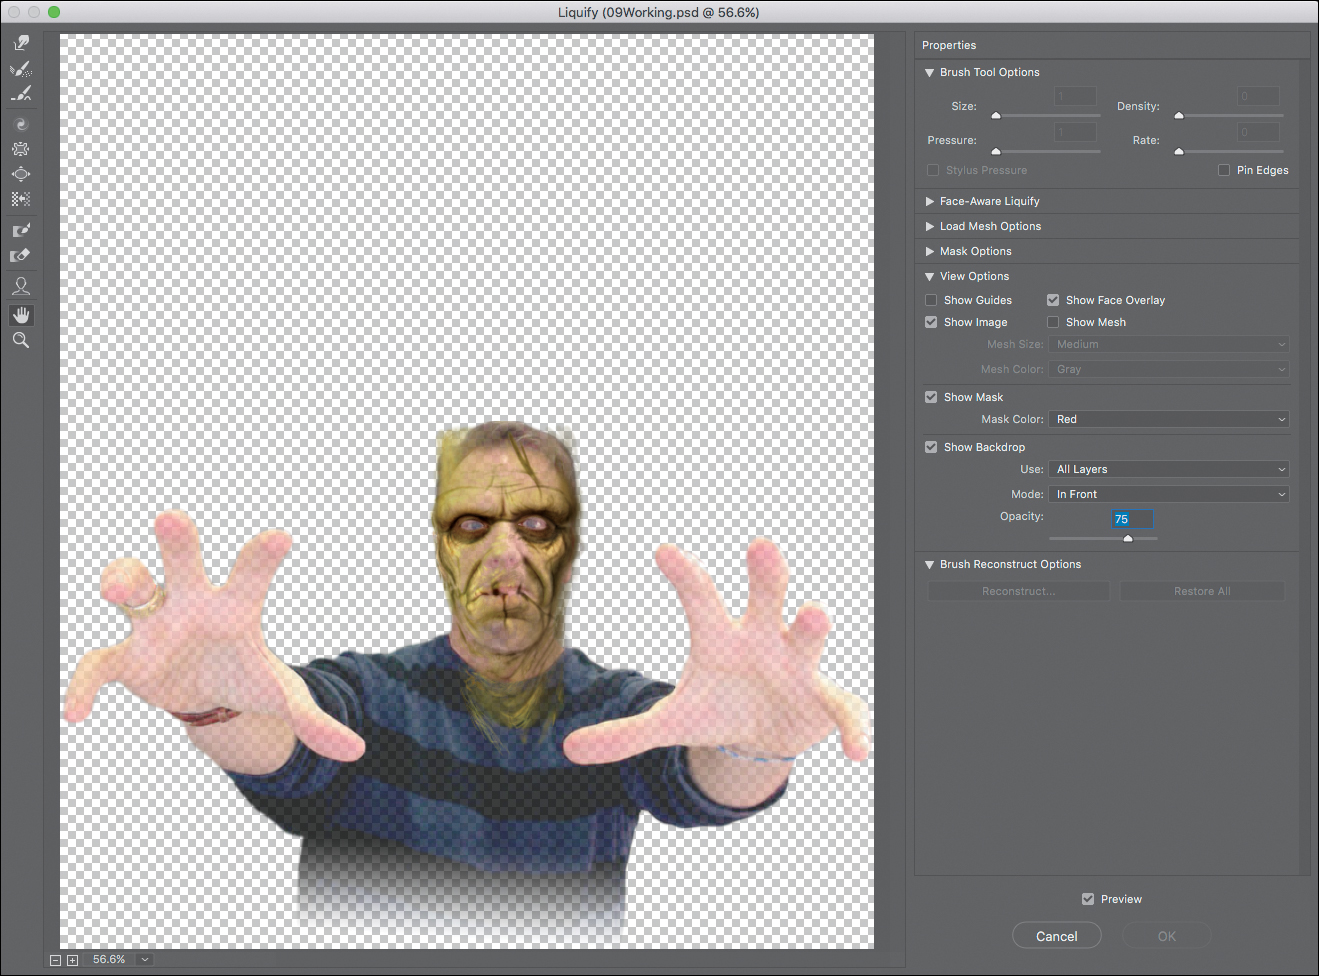 A screenshot shows the image of a person with the applied layer of the green skin texture opened in the Liquify dialog box